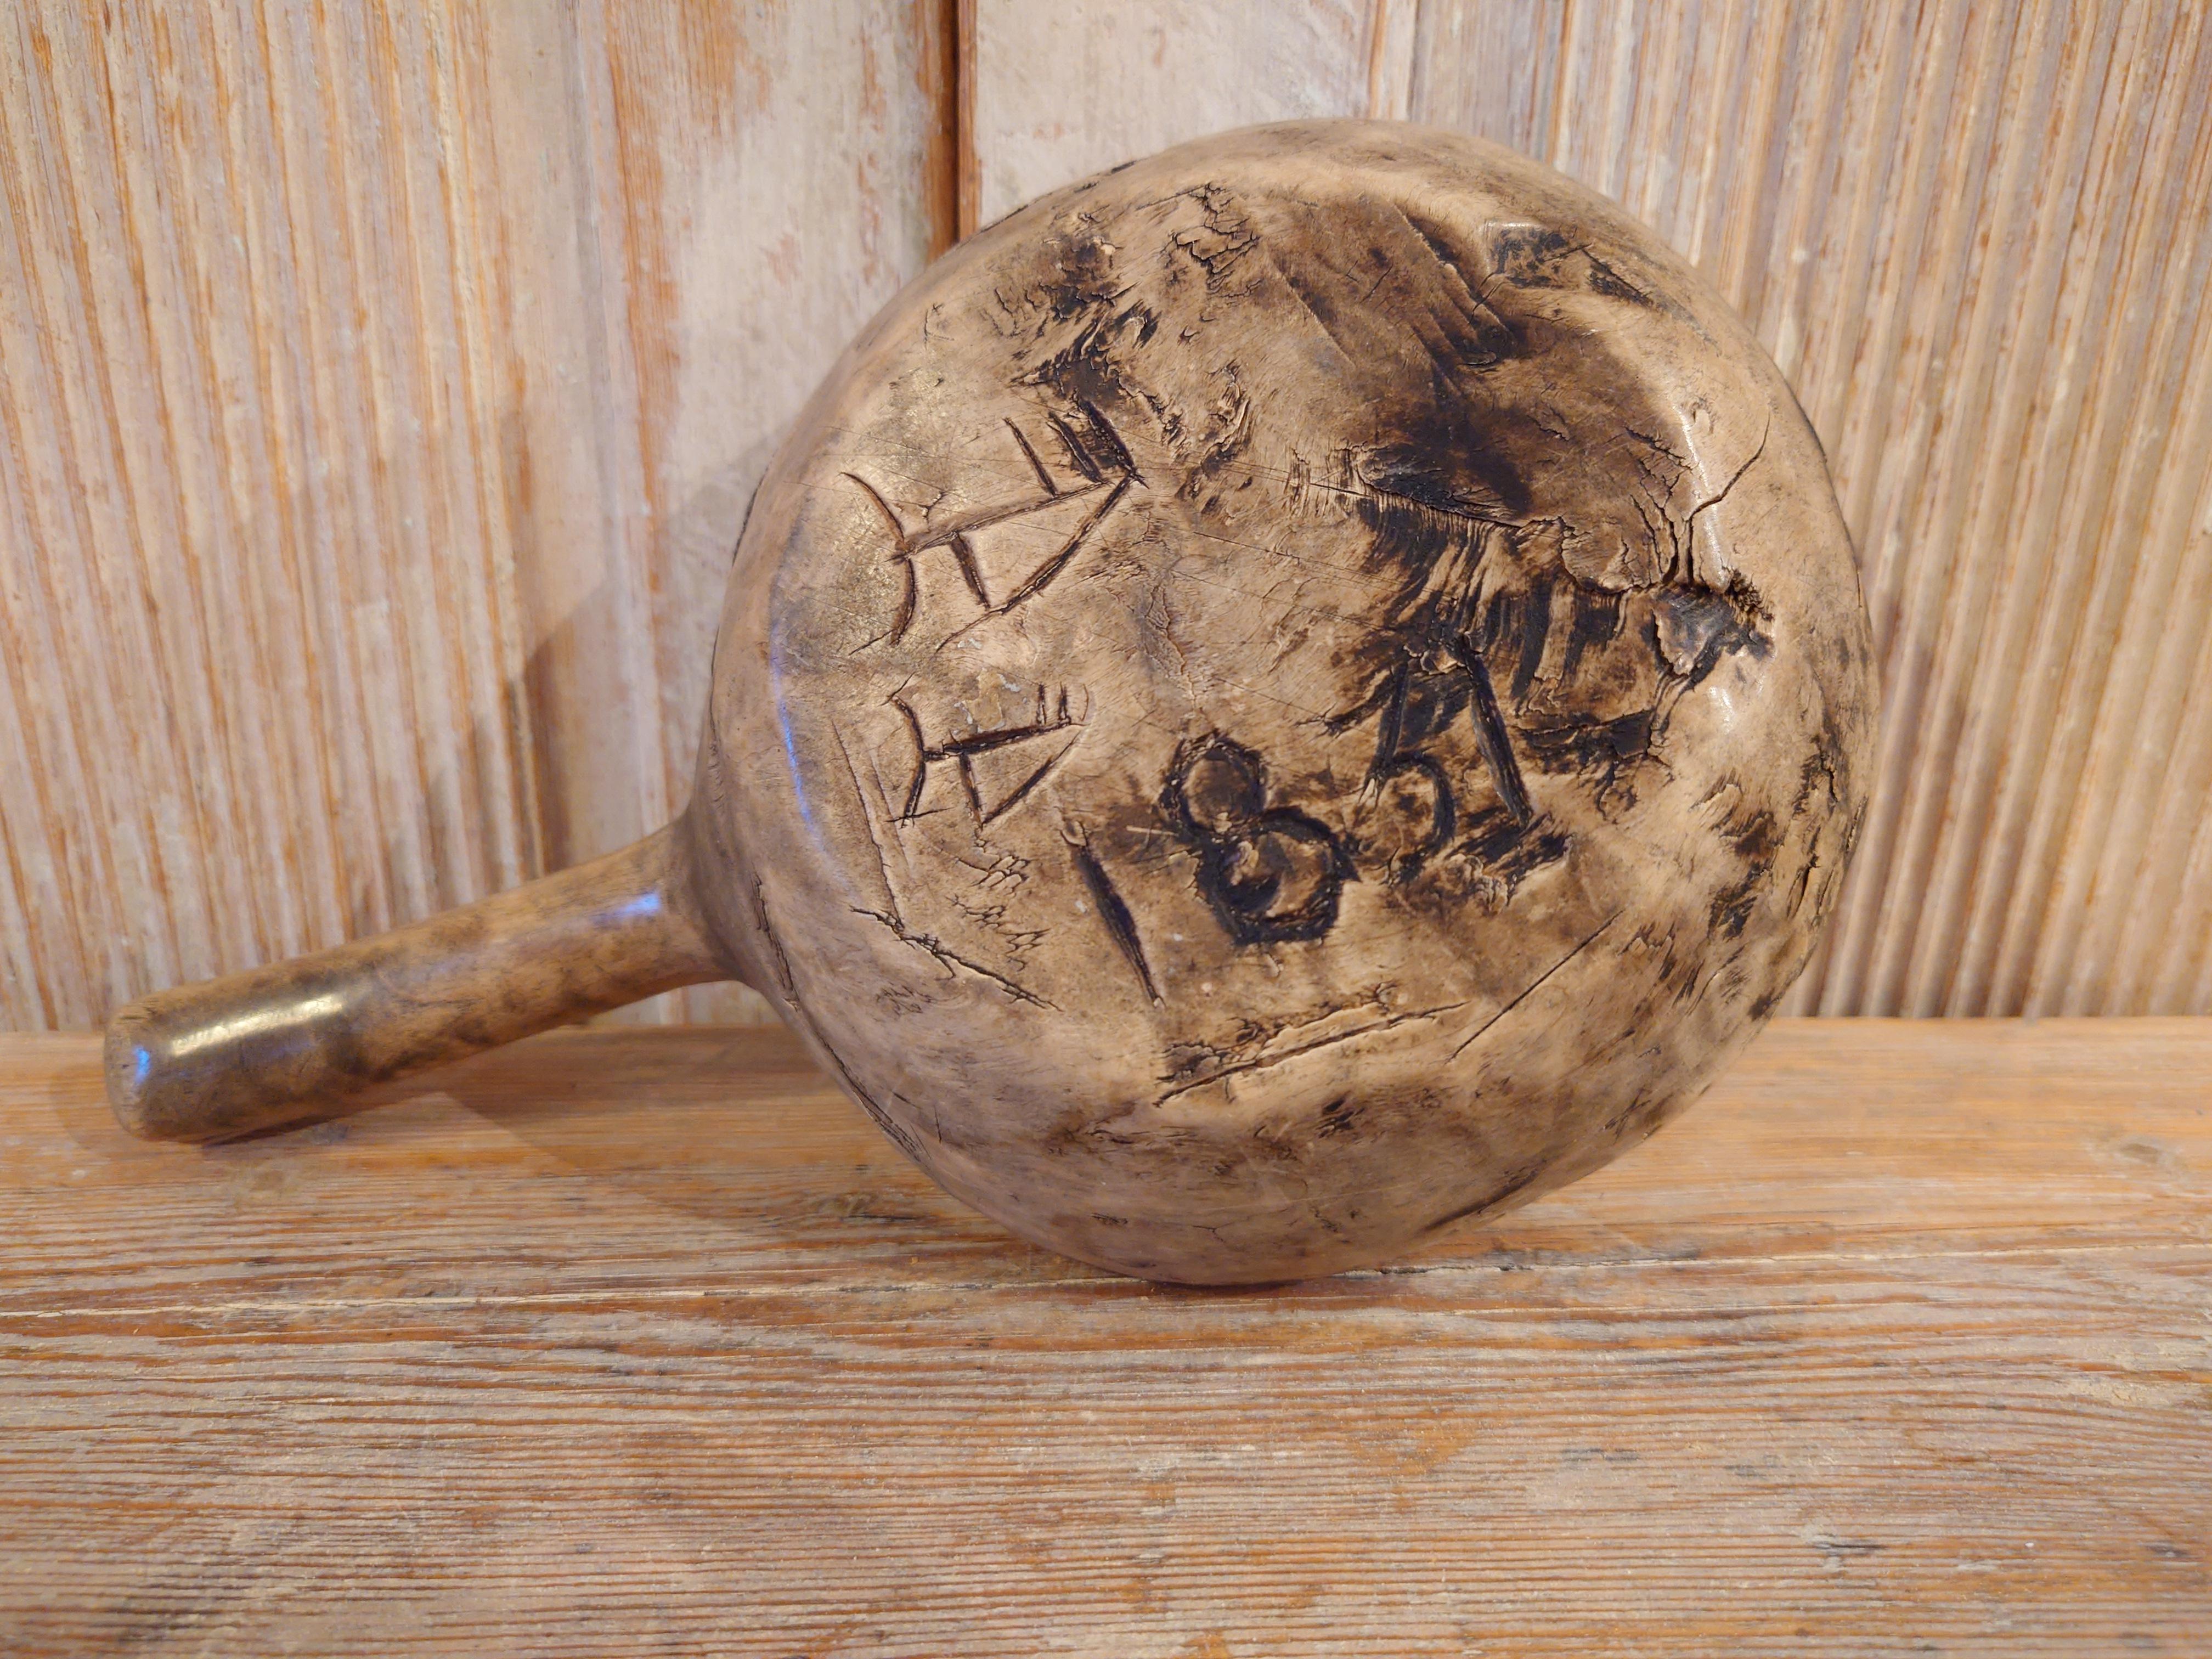 19th Century, Swedish Antique Rustic Wooden Bowl with Handle Dated 1831 For Sale 4